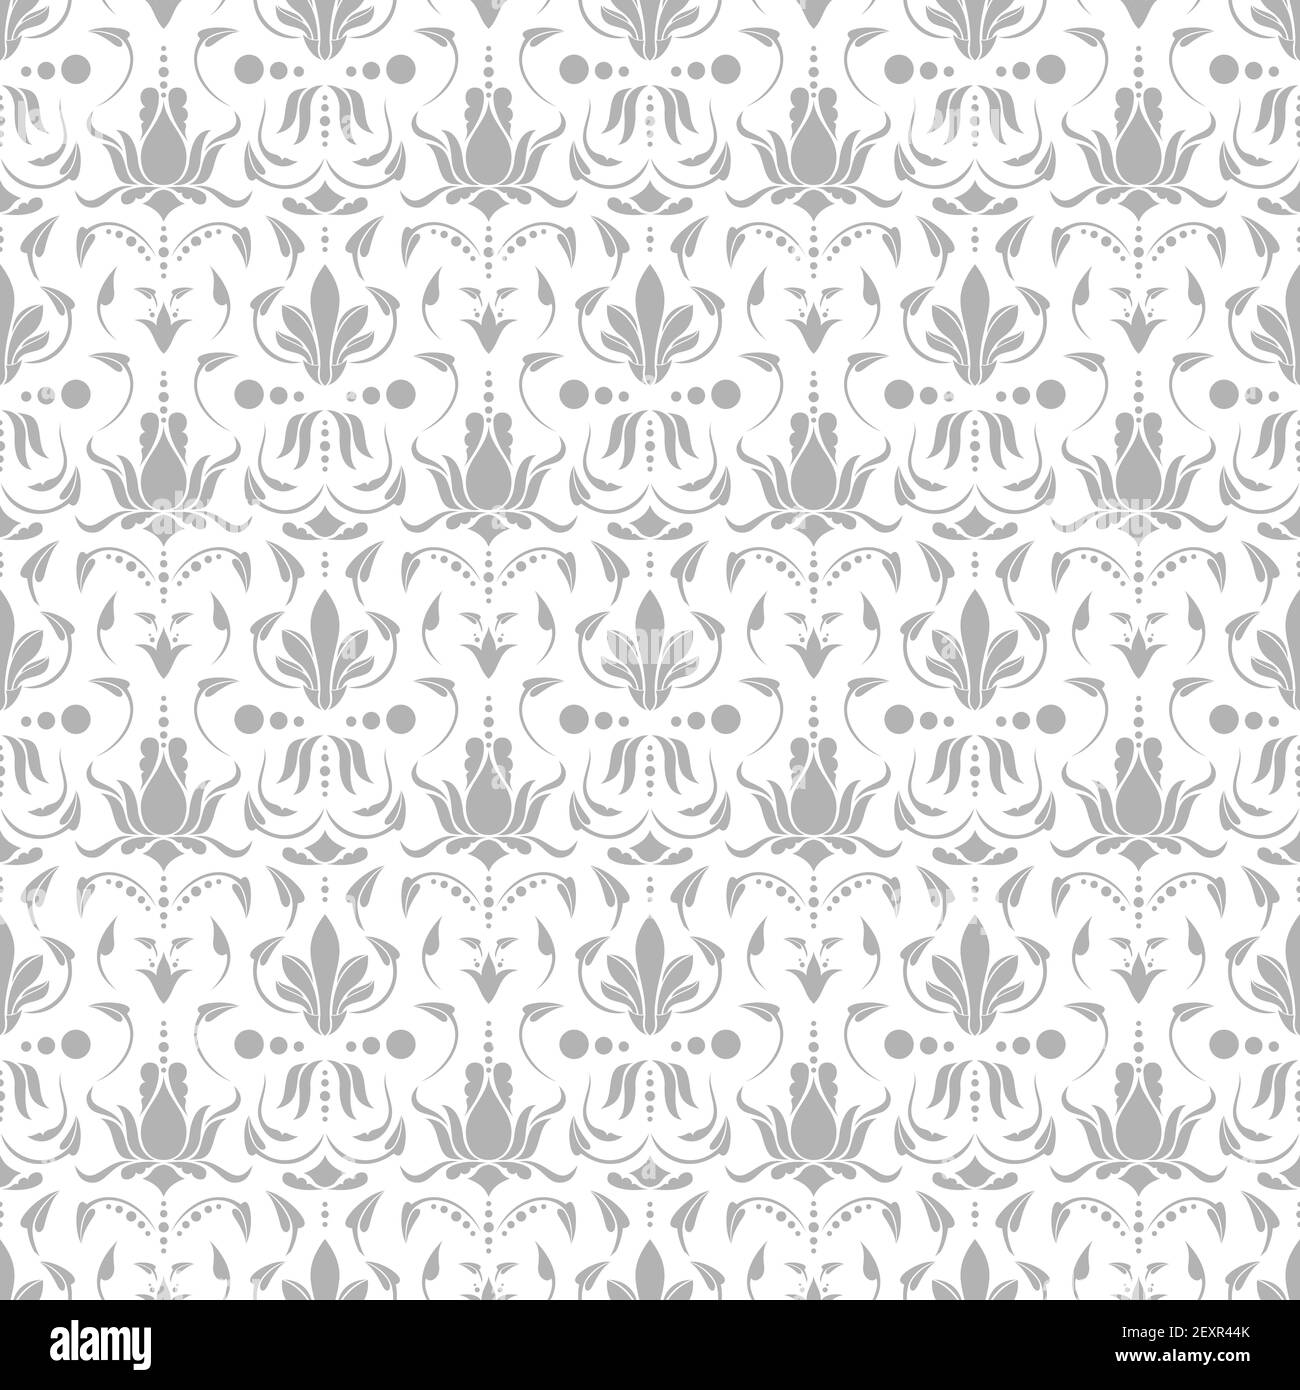 Floral seamless texture. Wallpaper pattern with decorative flowers. Vector vintage floral background Stock Vector